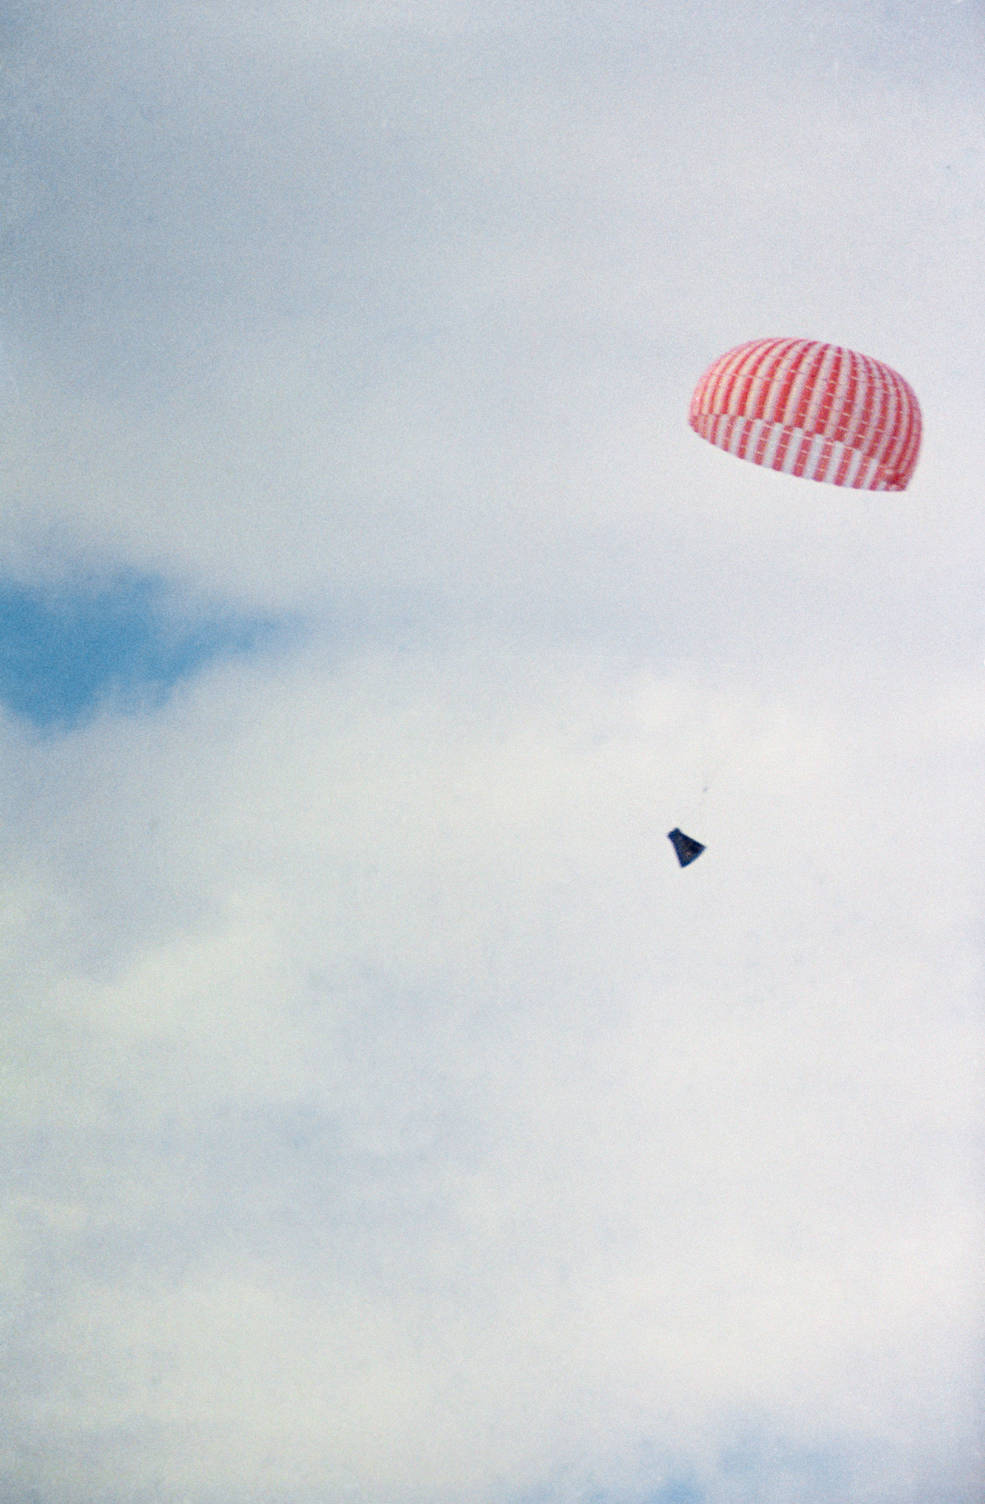 The Gemini XII spacecraft dangles from a parachute as it returns to Earth from space